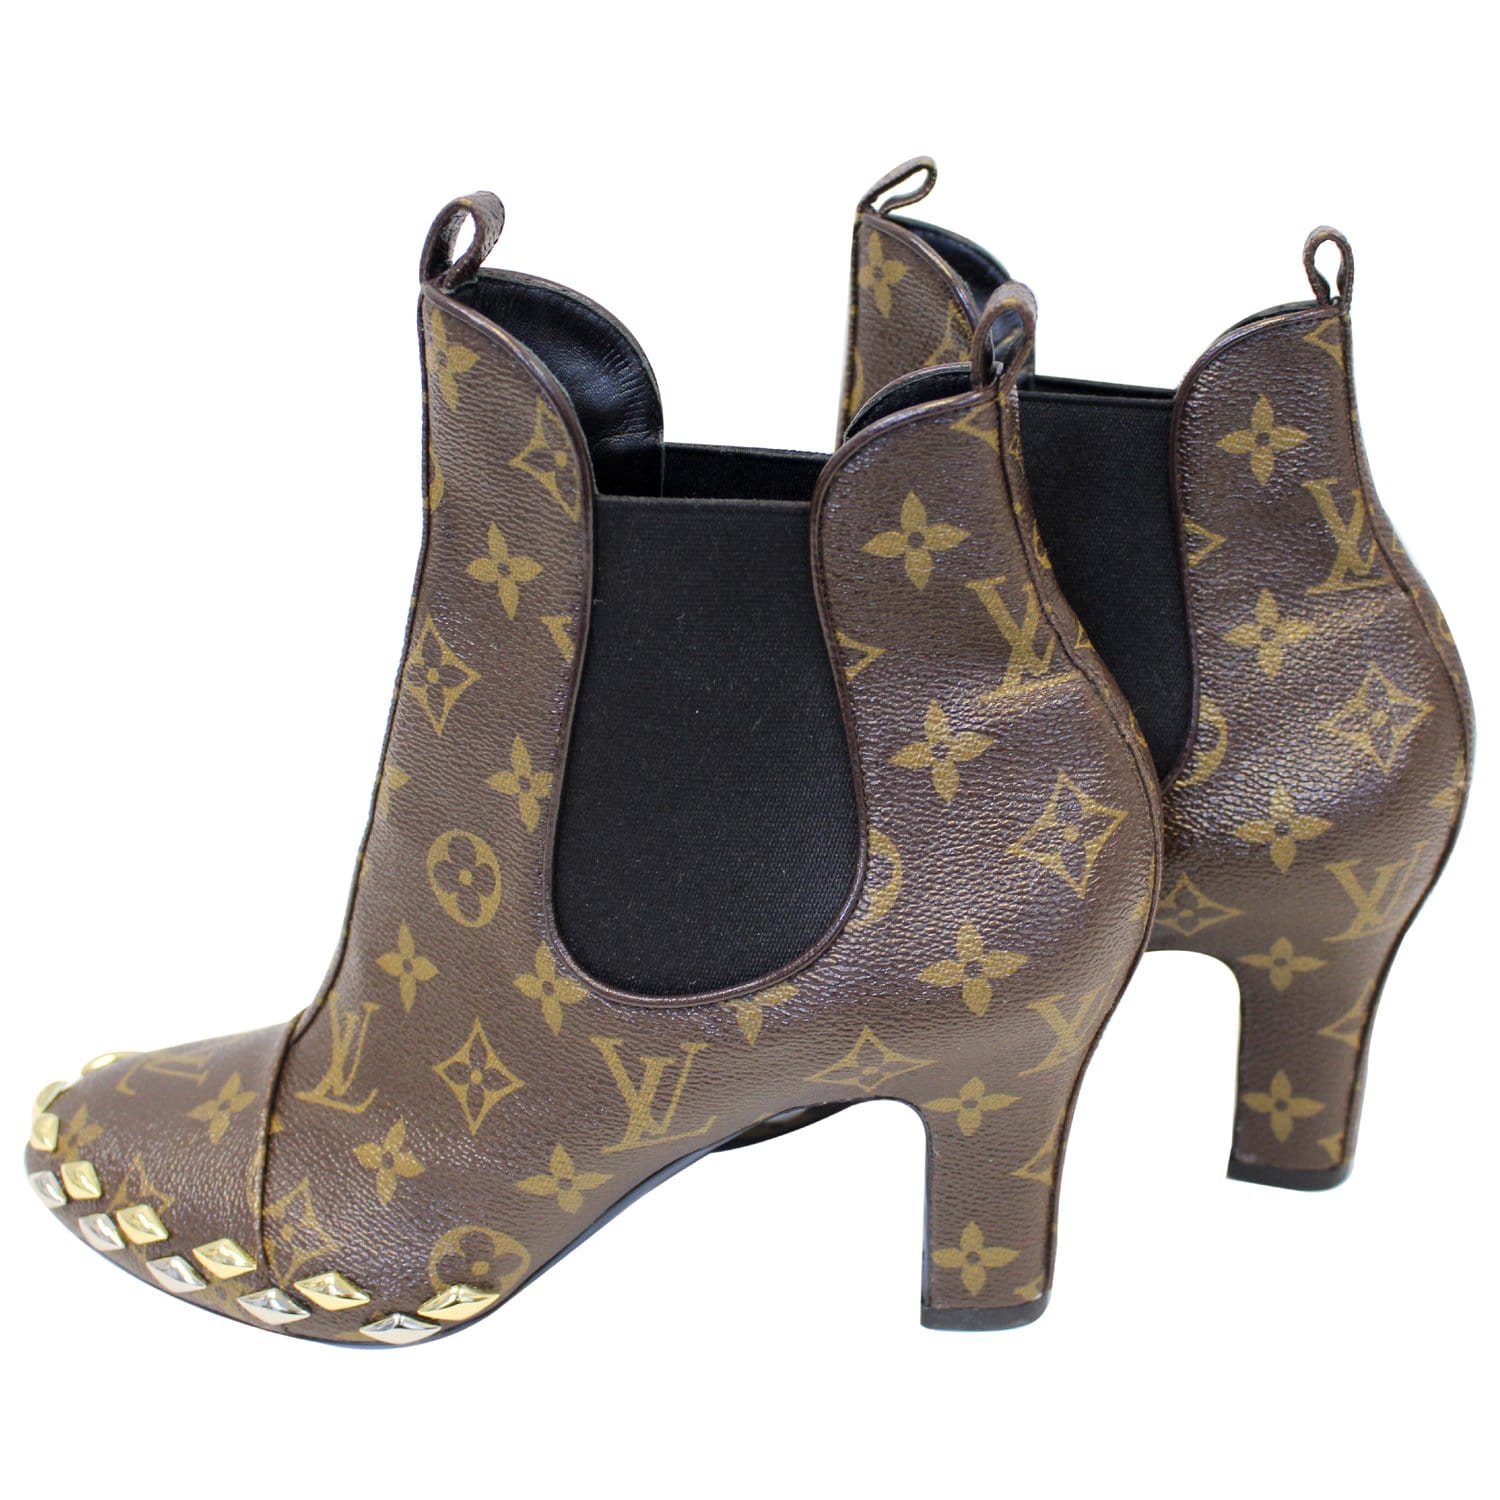 Louis Vuitton, Shoes, Gently Used Louis Vuitton Heels